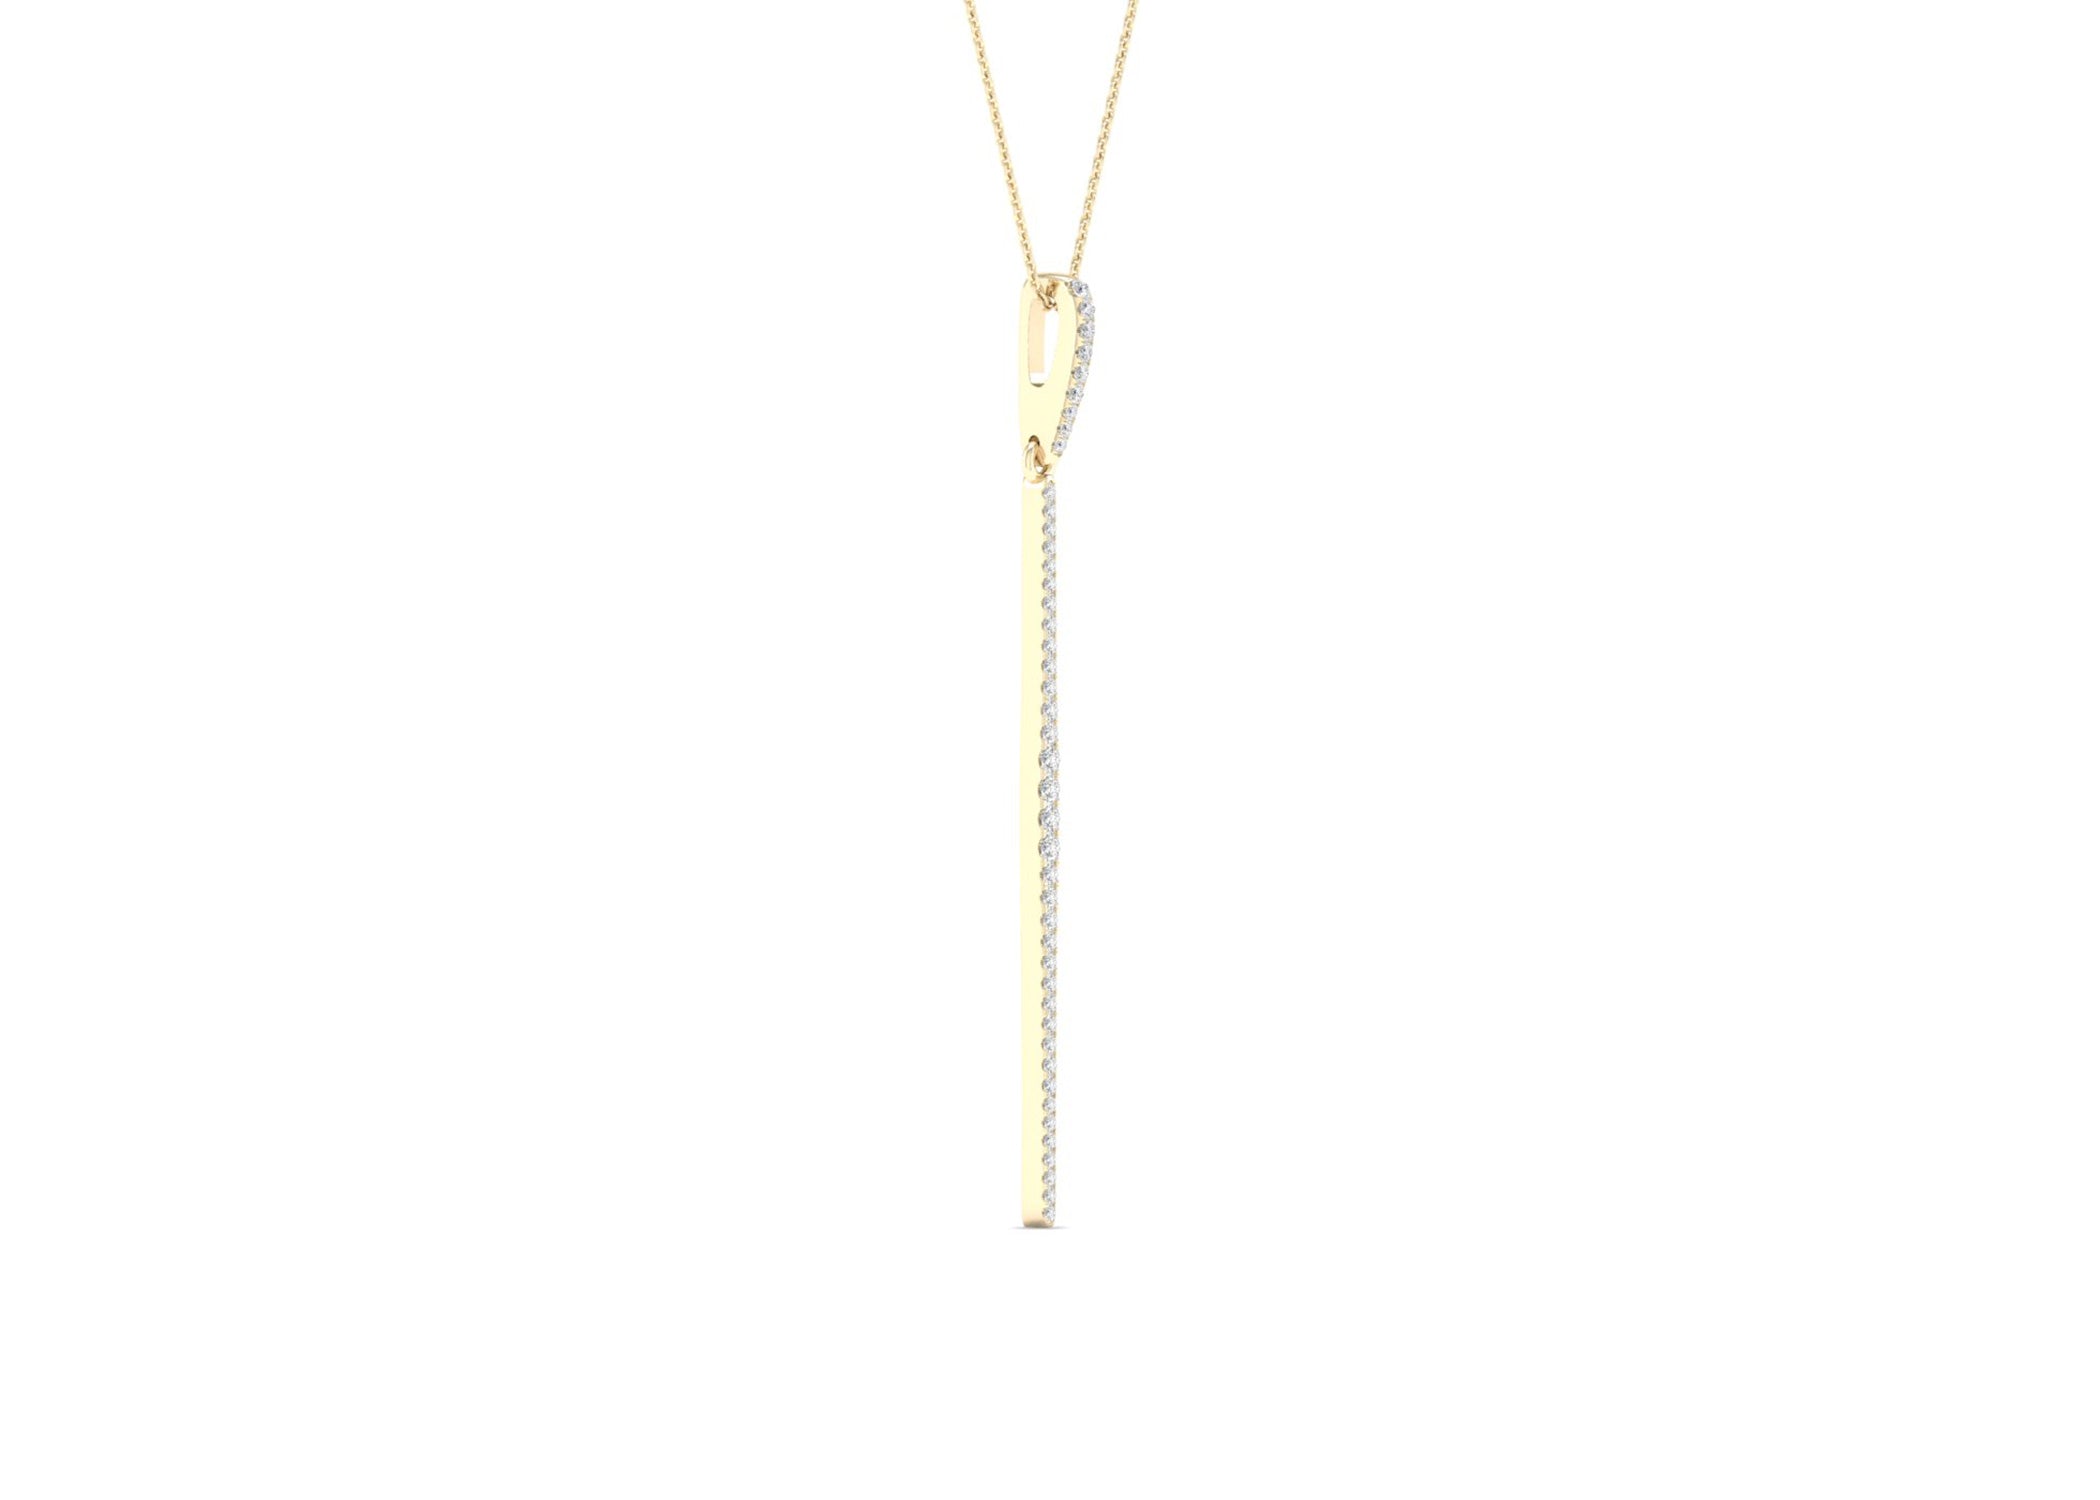 Tapering Linear Bar Necklace Replica